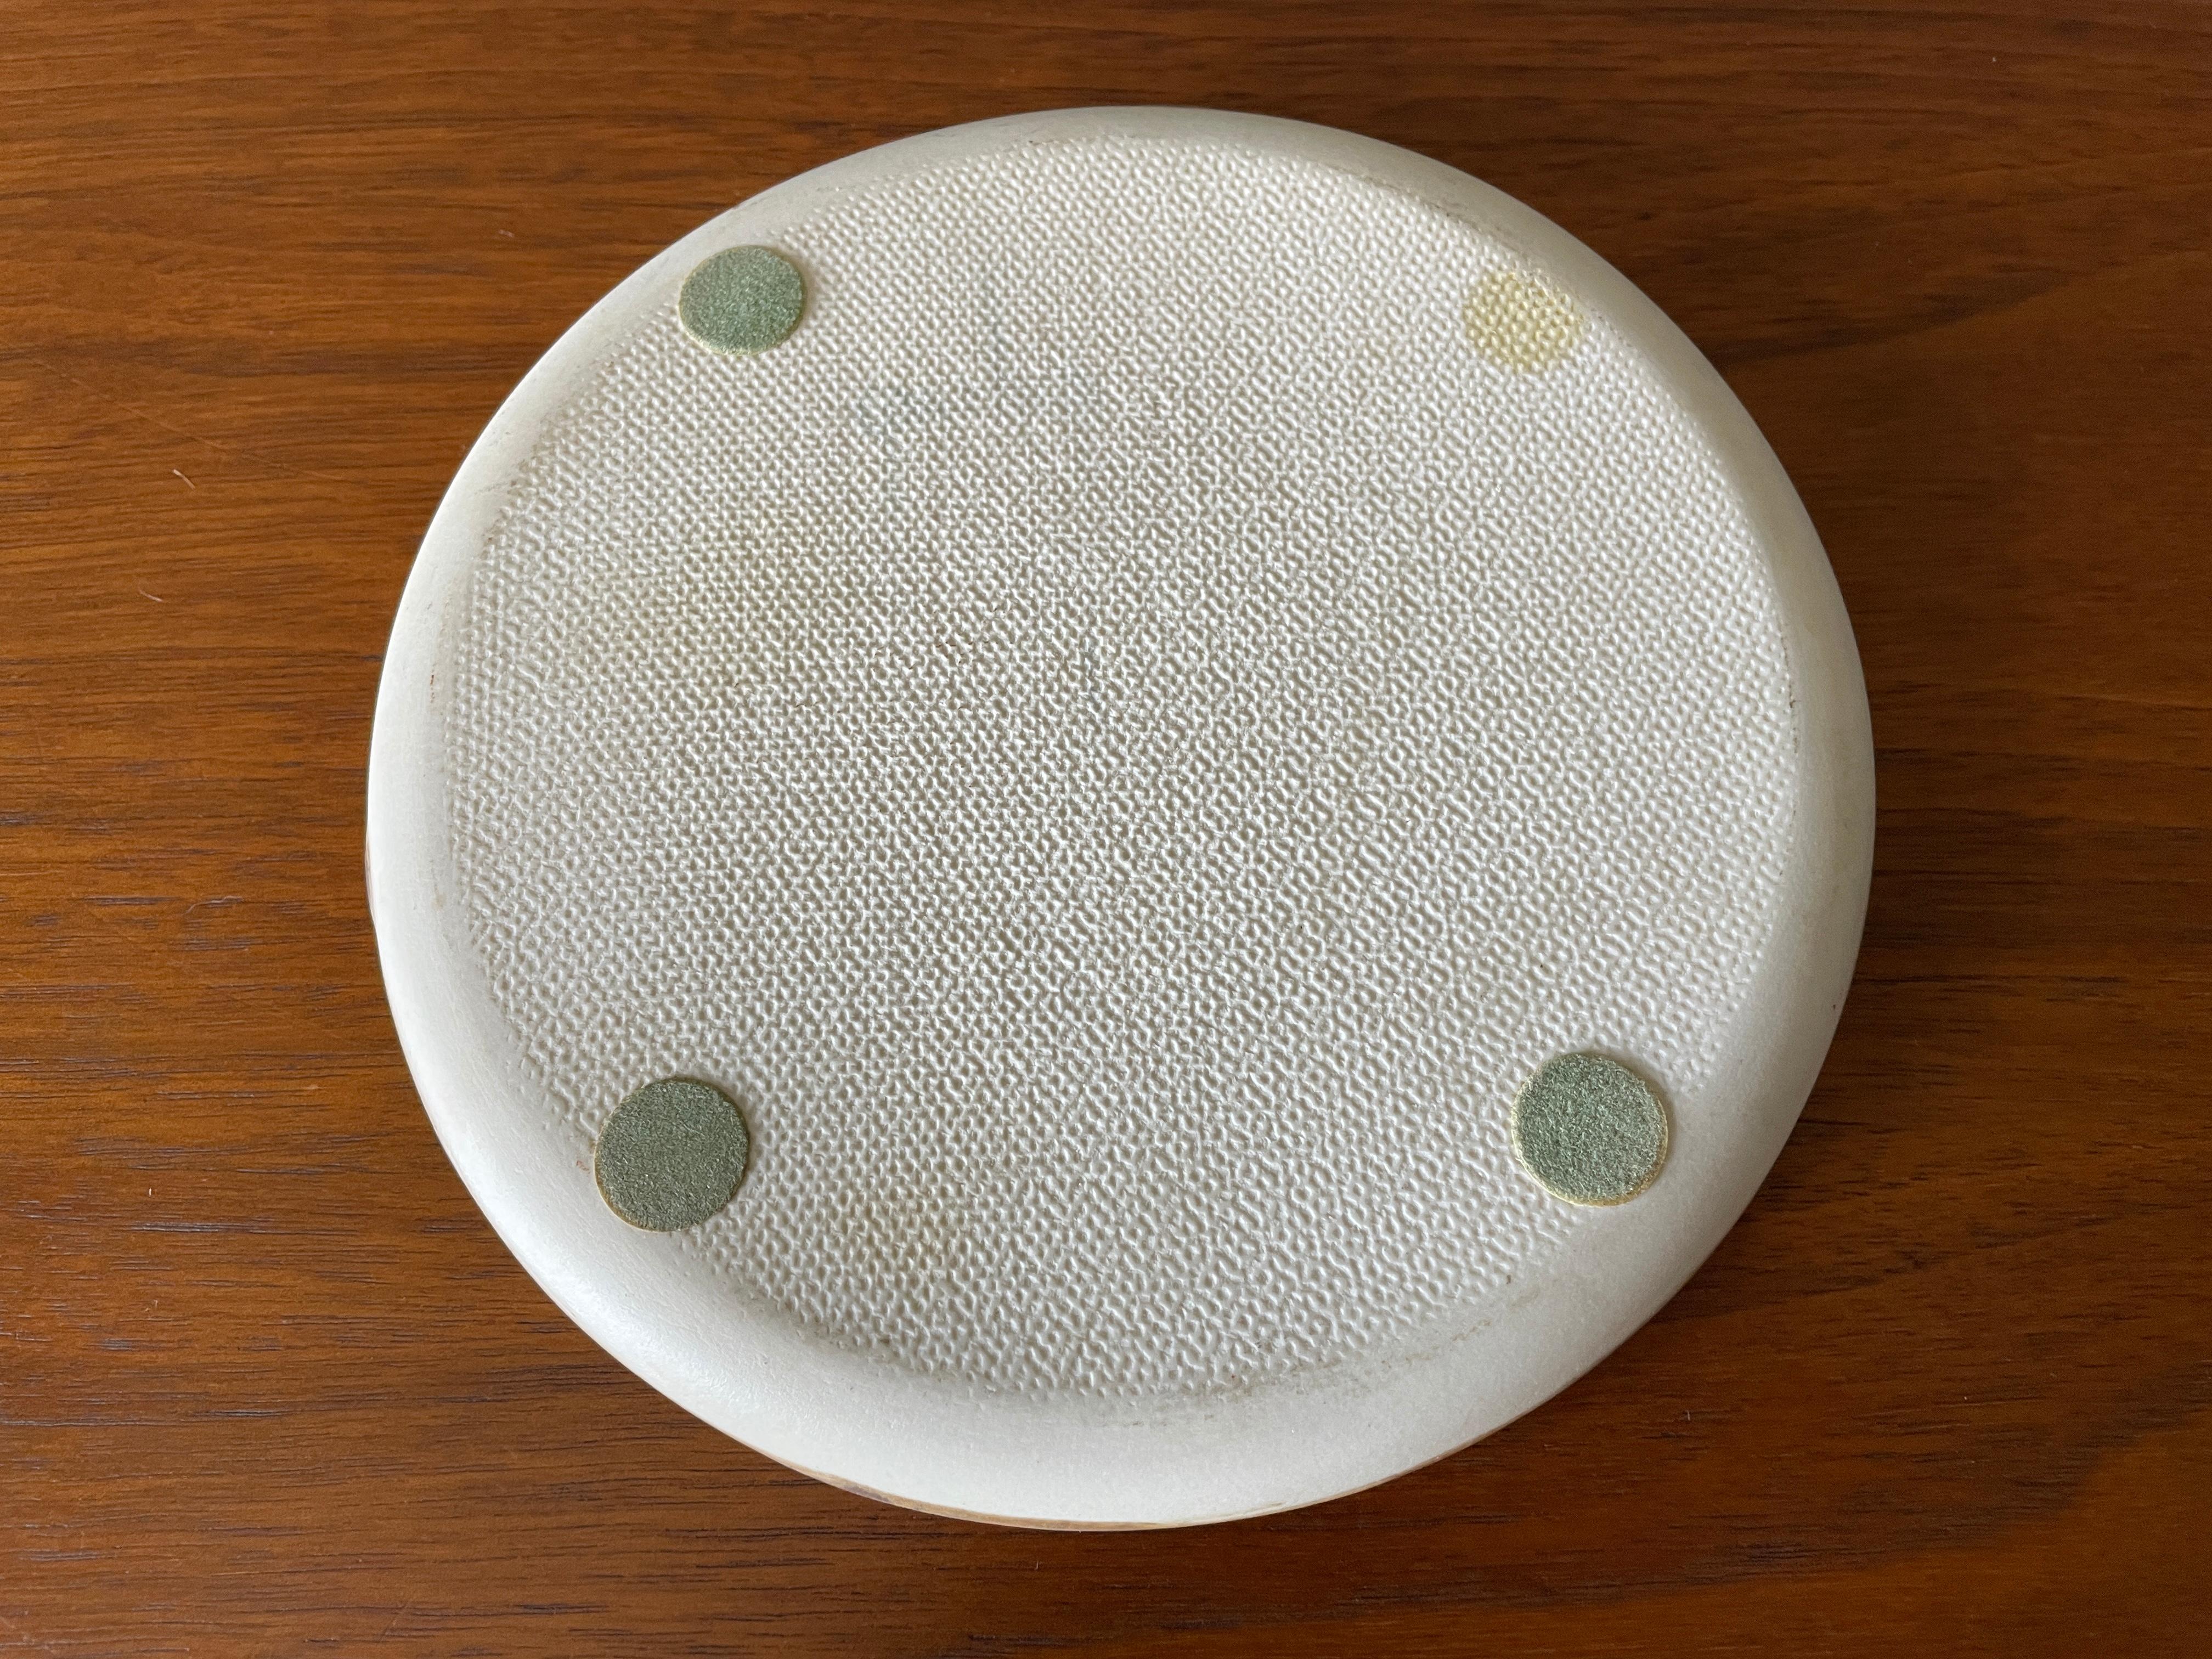 Vintage Studio Crafted Ceramic and Glass Decorative Plate In Good Condition For Sale In Costa Mesa, CA